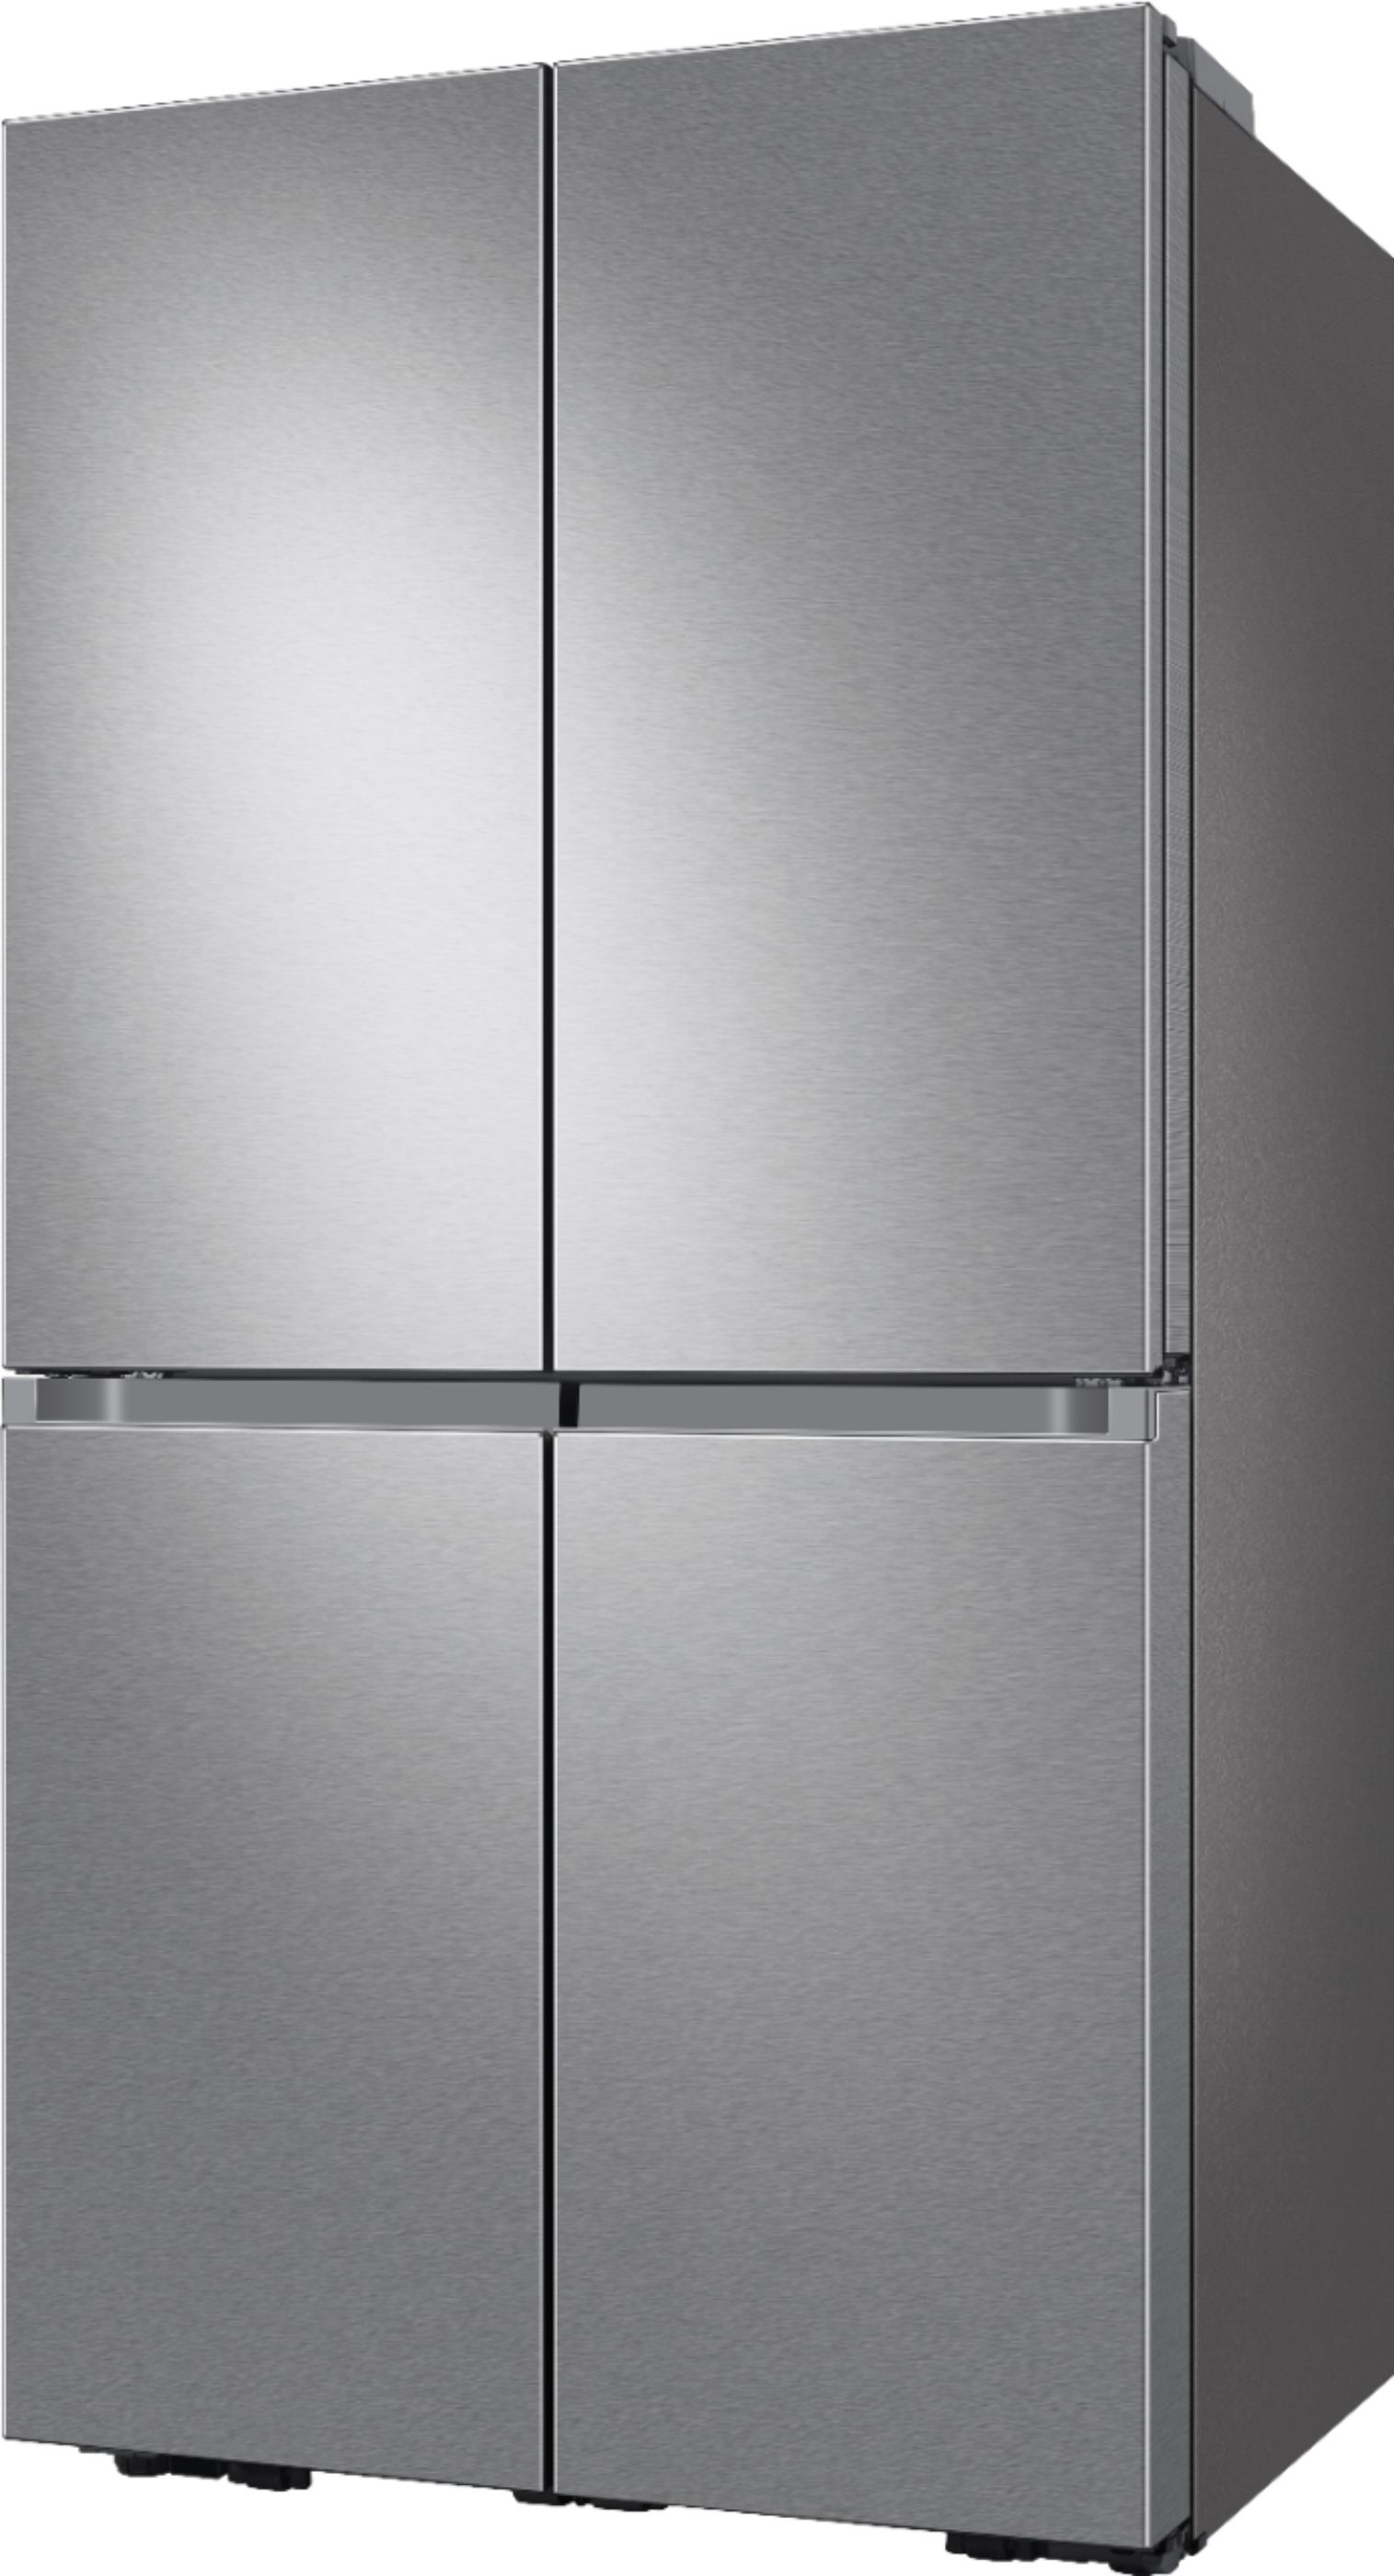 Angle View: Samsung - Bespoke 23 cu. ft. 4-Door Flex French Door Counter Depth Refrigerator with WiFi and Customizable Panel Colors - White